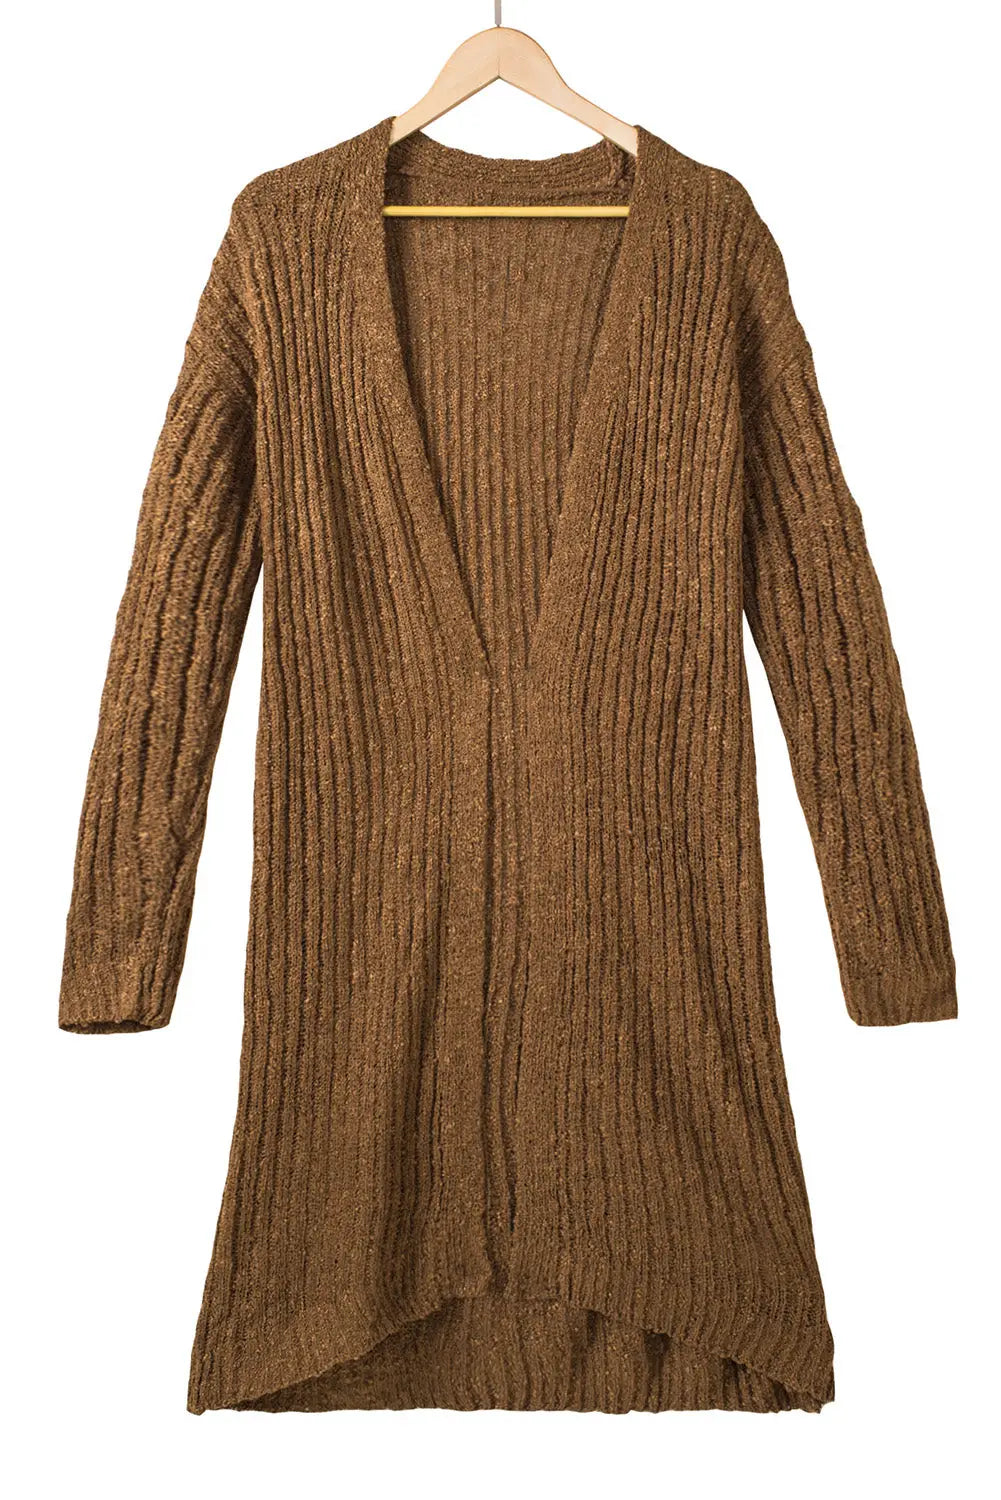 Brown open front drop shoulder knitted cardigan - sweaters & cardigans